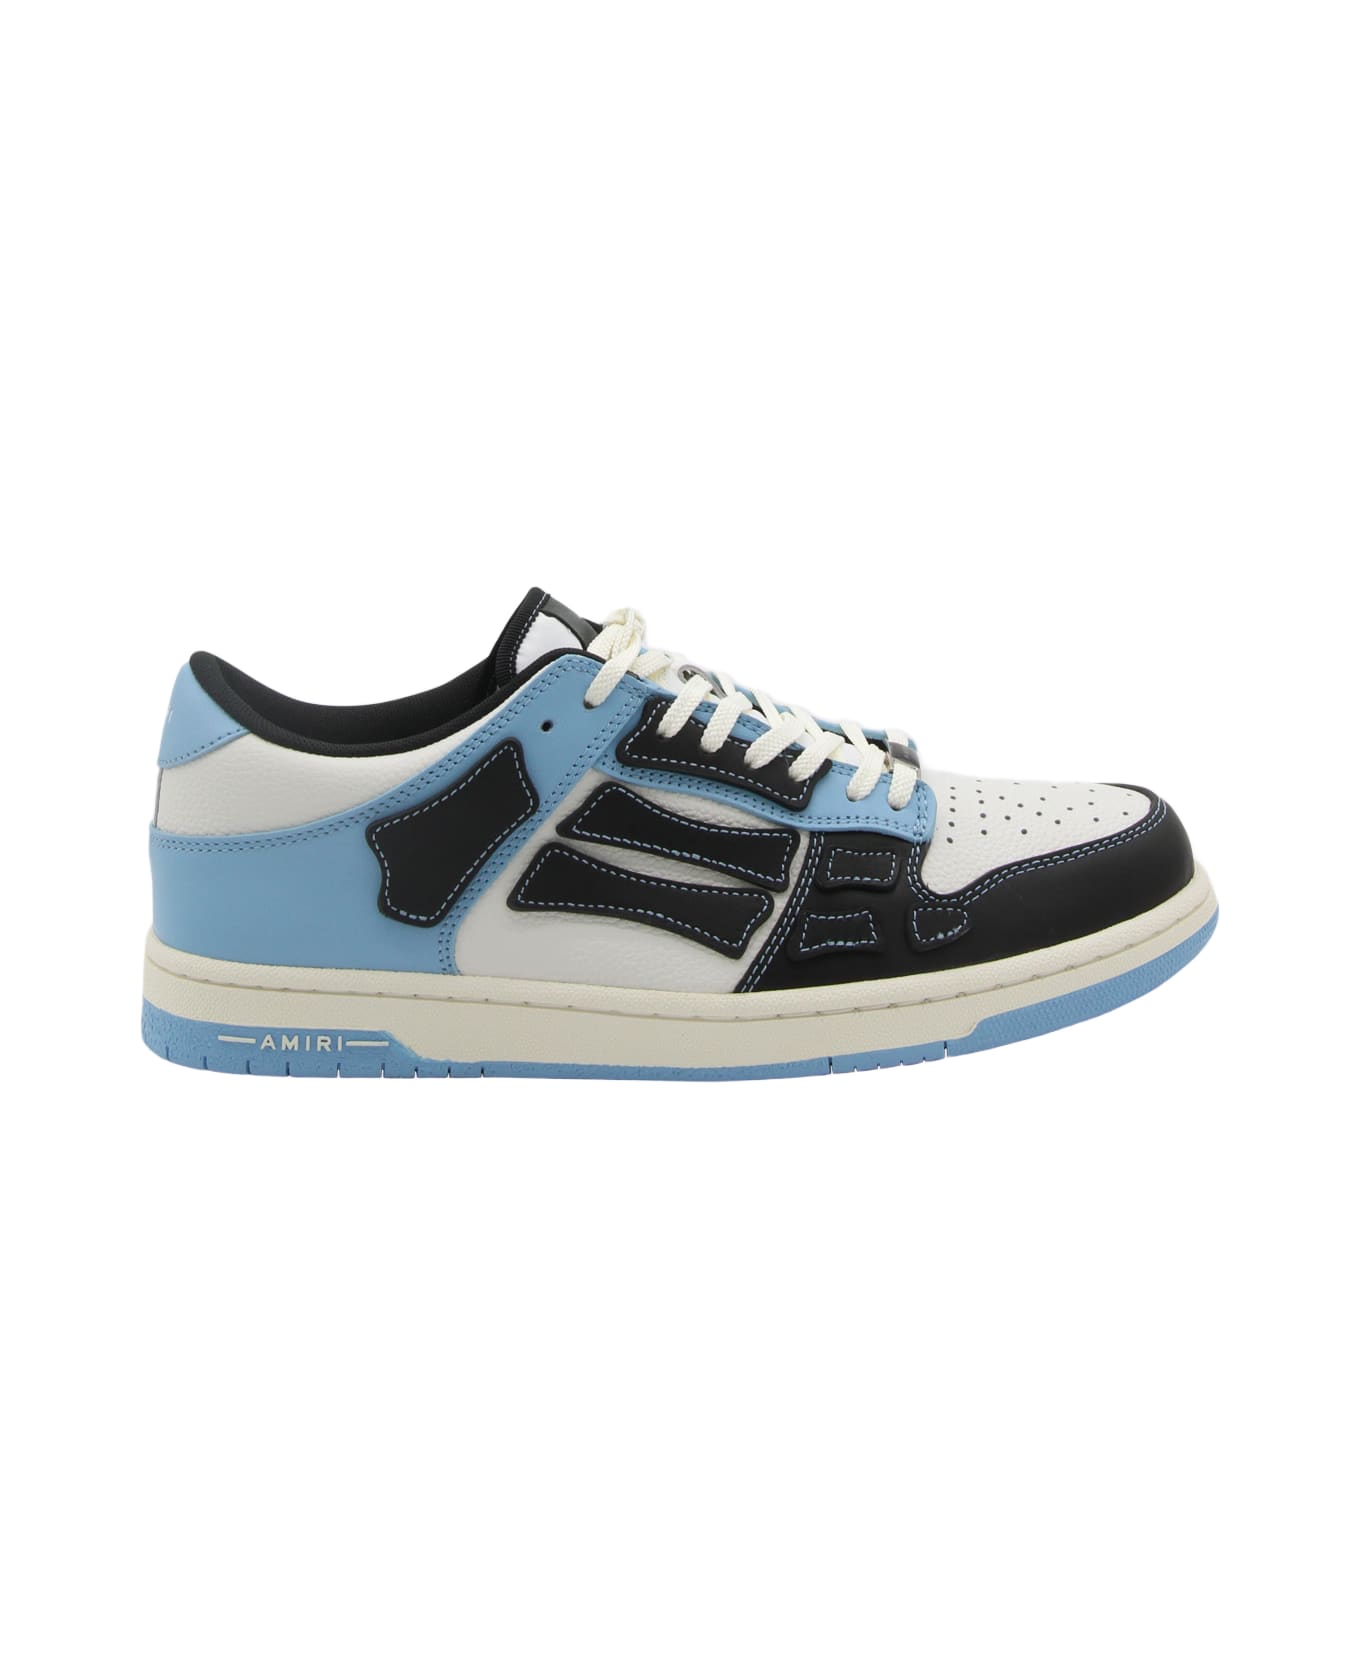 AMIRI Black, White And Light Blue Leather Sneakers - Airblue